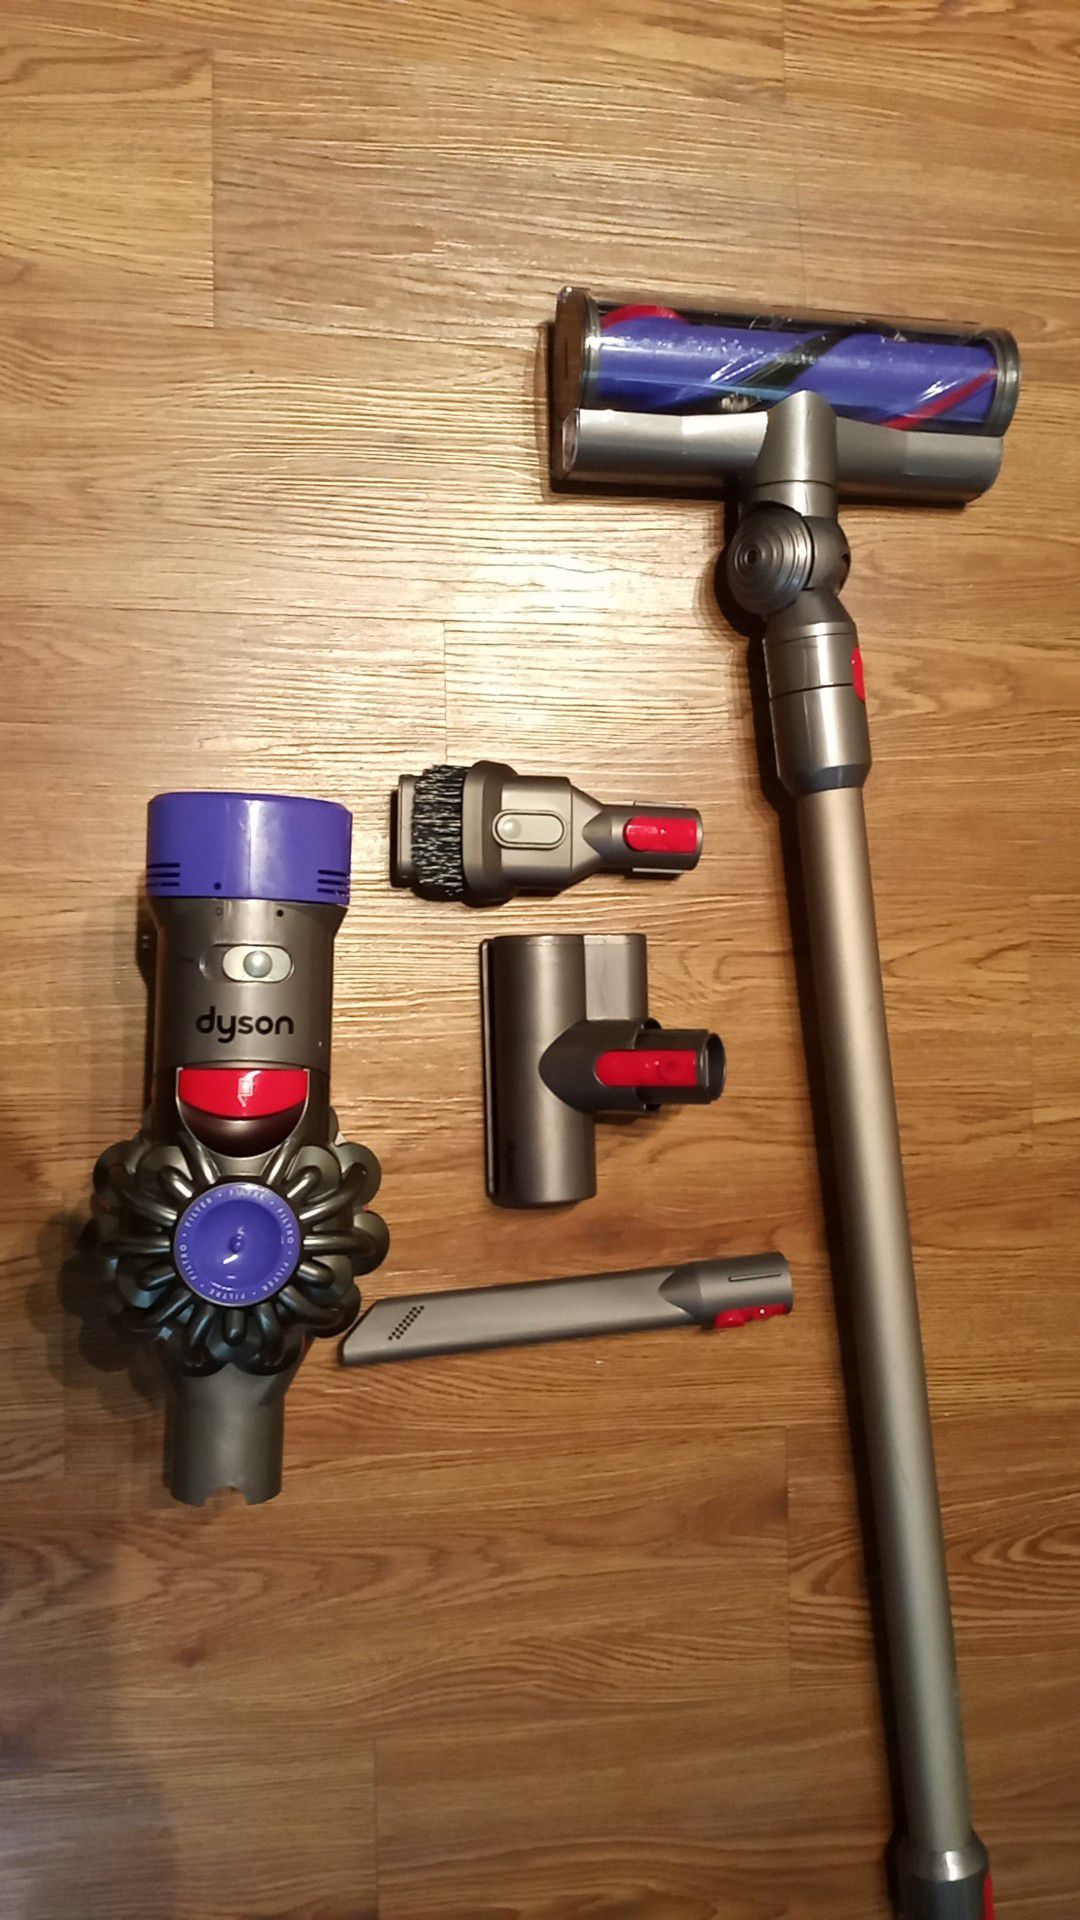 Dyson V8 vacuum stick with accessories (